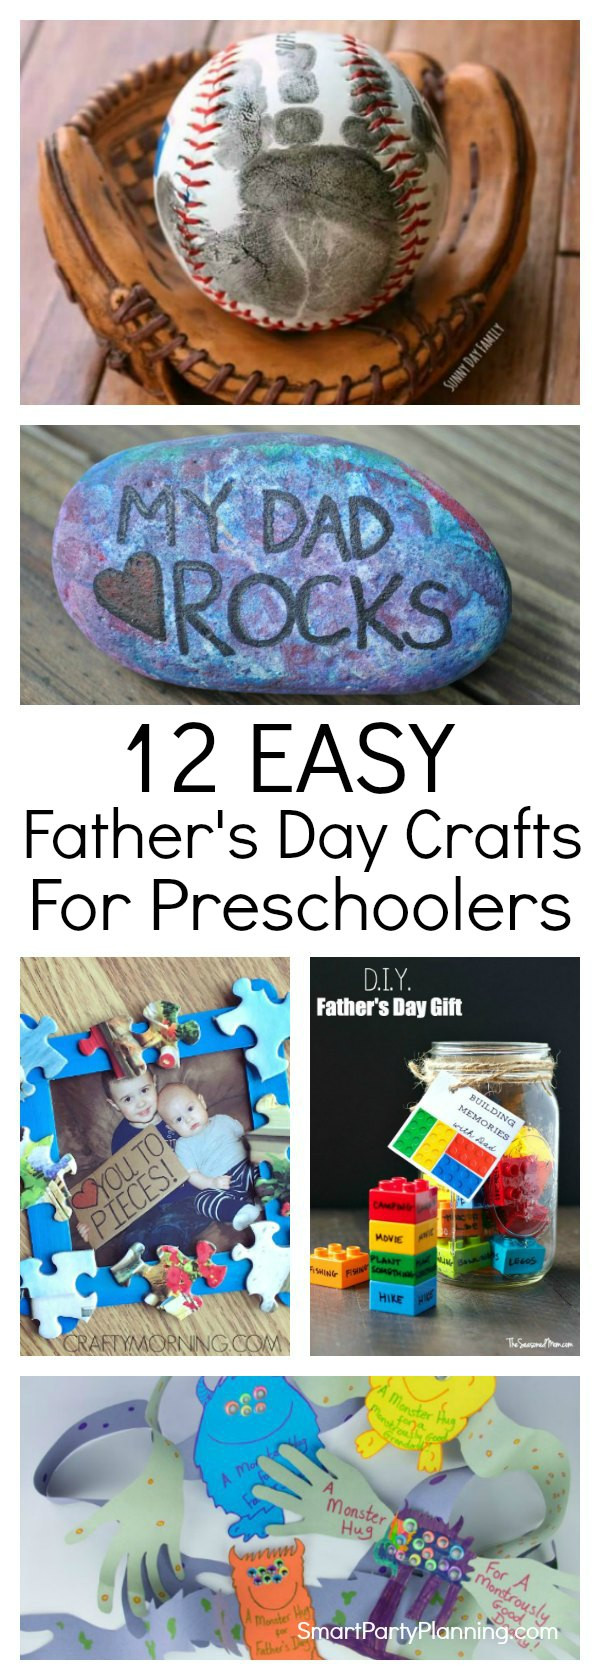 Easy Mother's Day Crafts For Preschoolers
 12 Easy Fathers Day Crafts For Preschoolers To Make